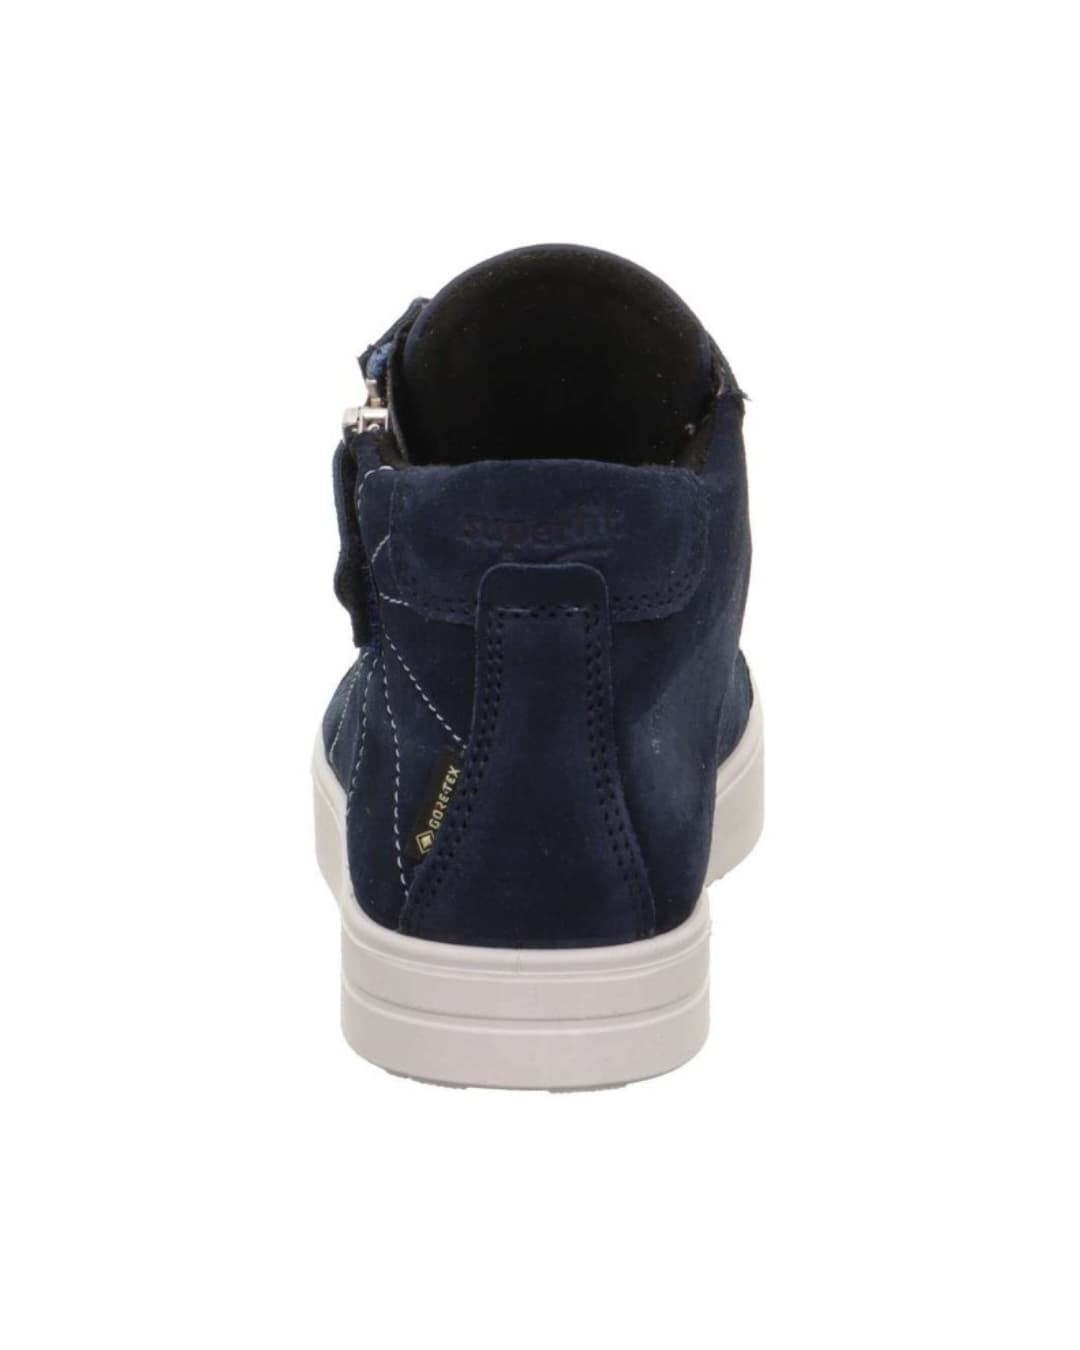 Superfit Gore-tex Ankle Boot Girl Navy Blue - Image 3